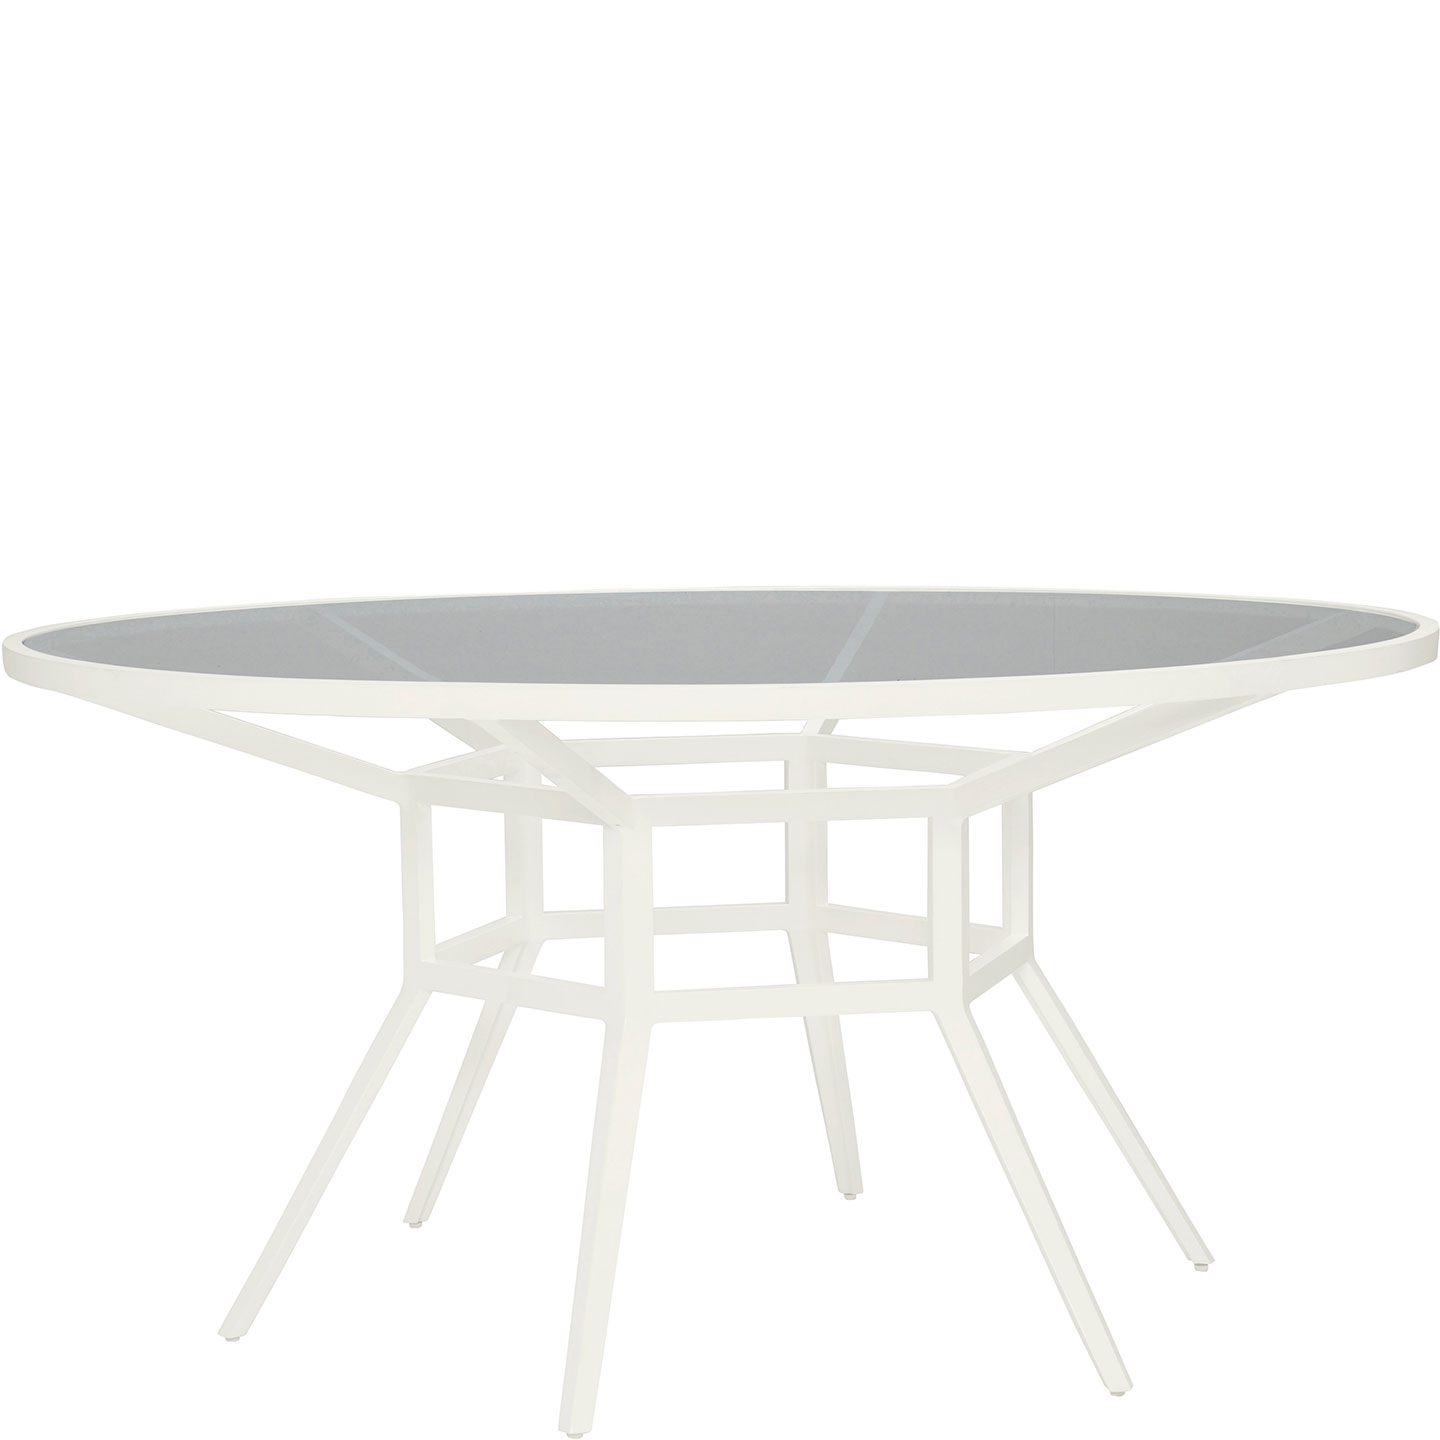 Haworth Slant Table with glass top and 6 white legs